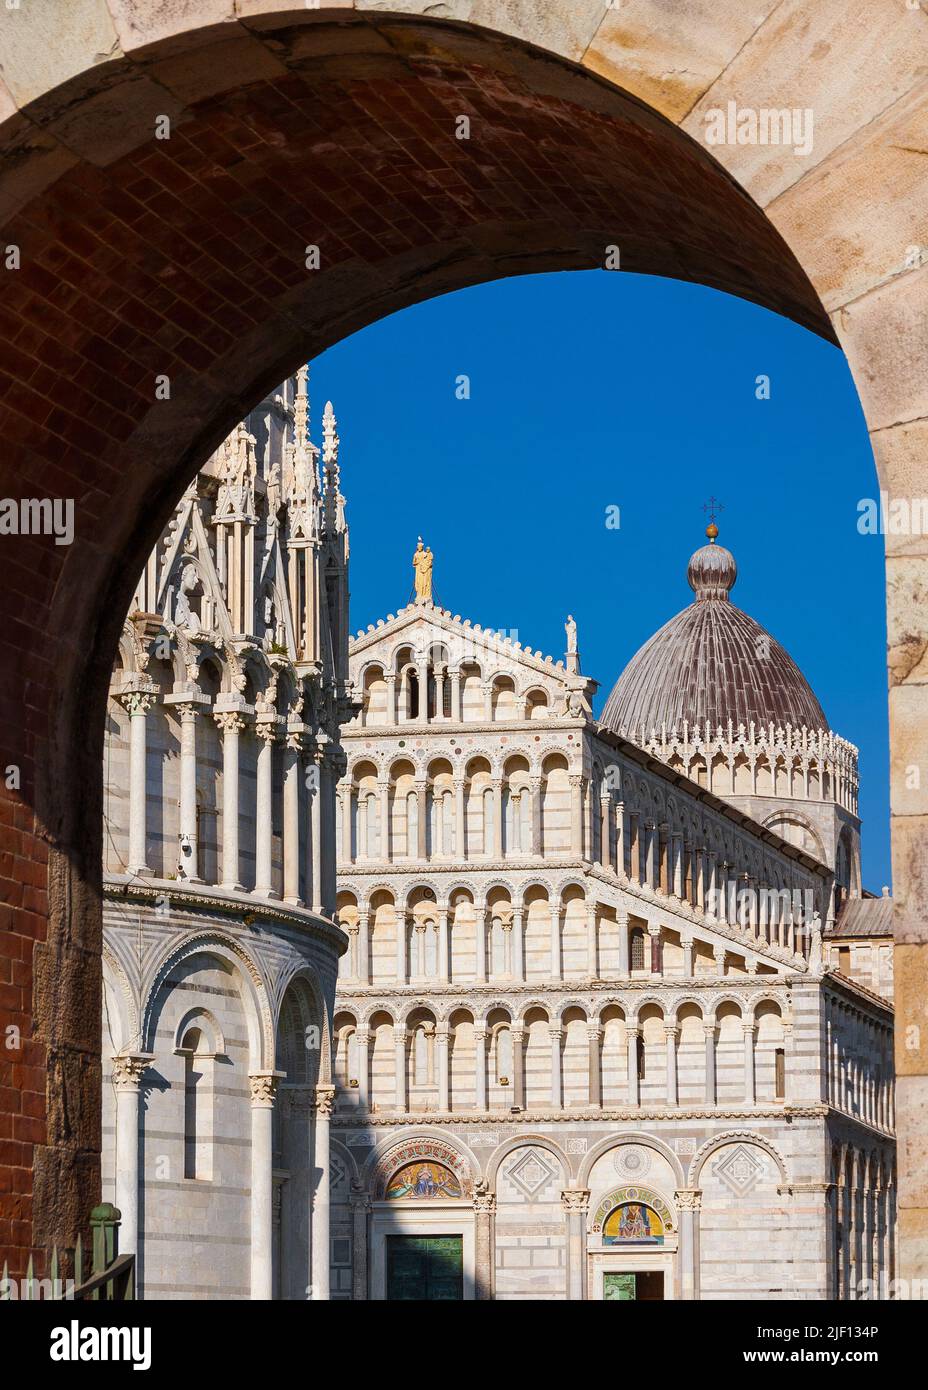 Pisa bastistry and Cathedral in the Square of Miracles, seen through ancient city walls gate Stock Photo